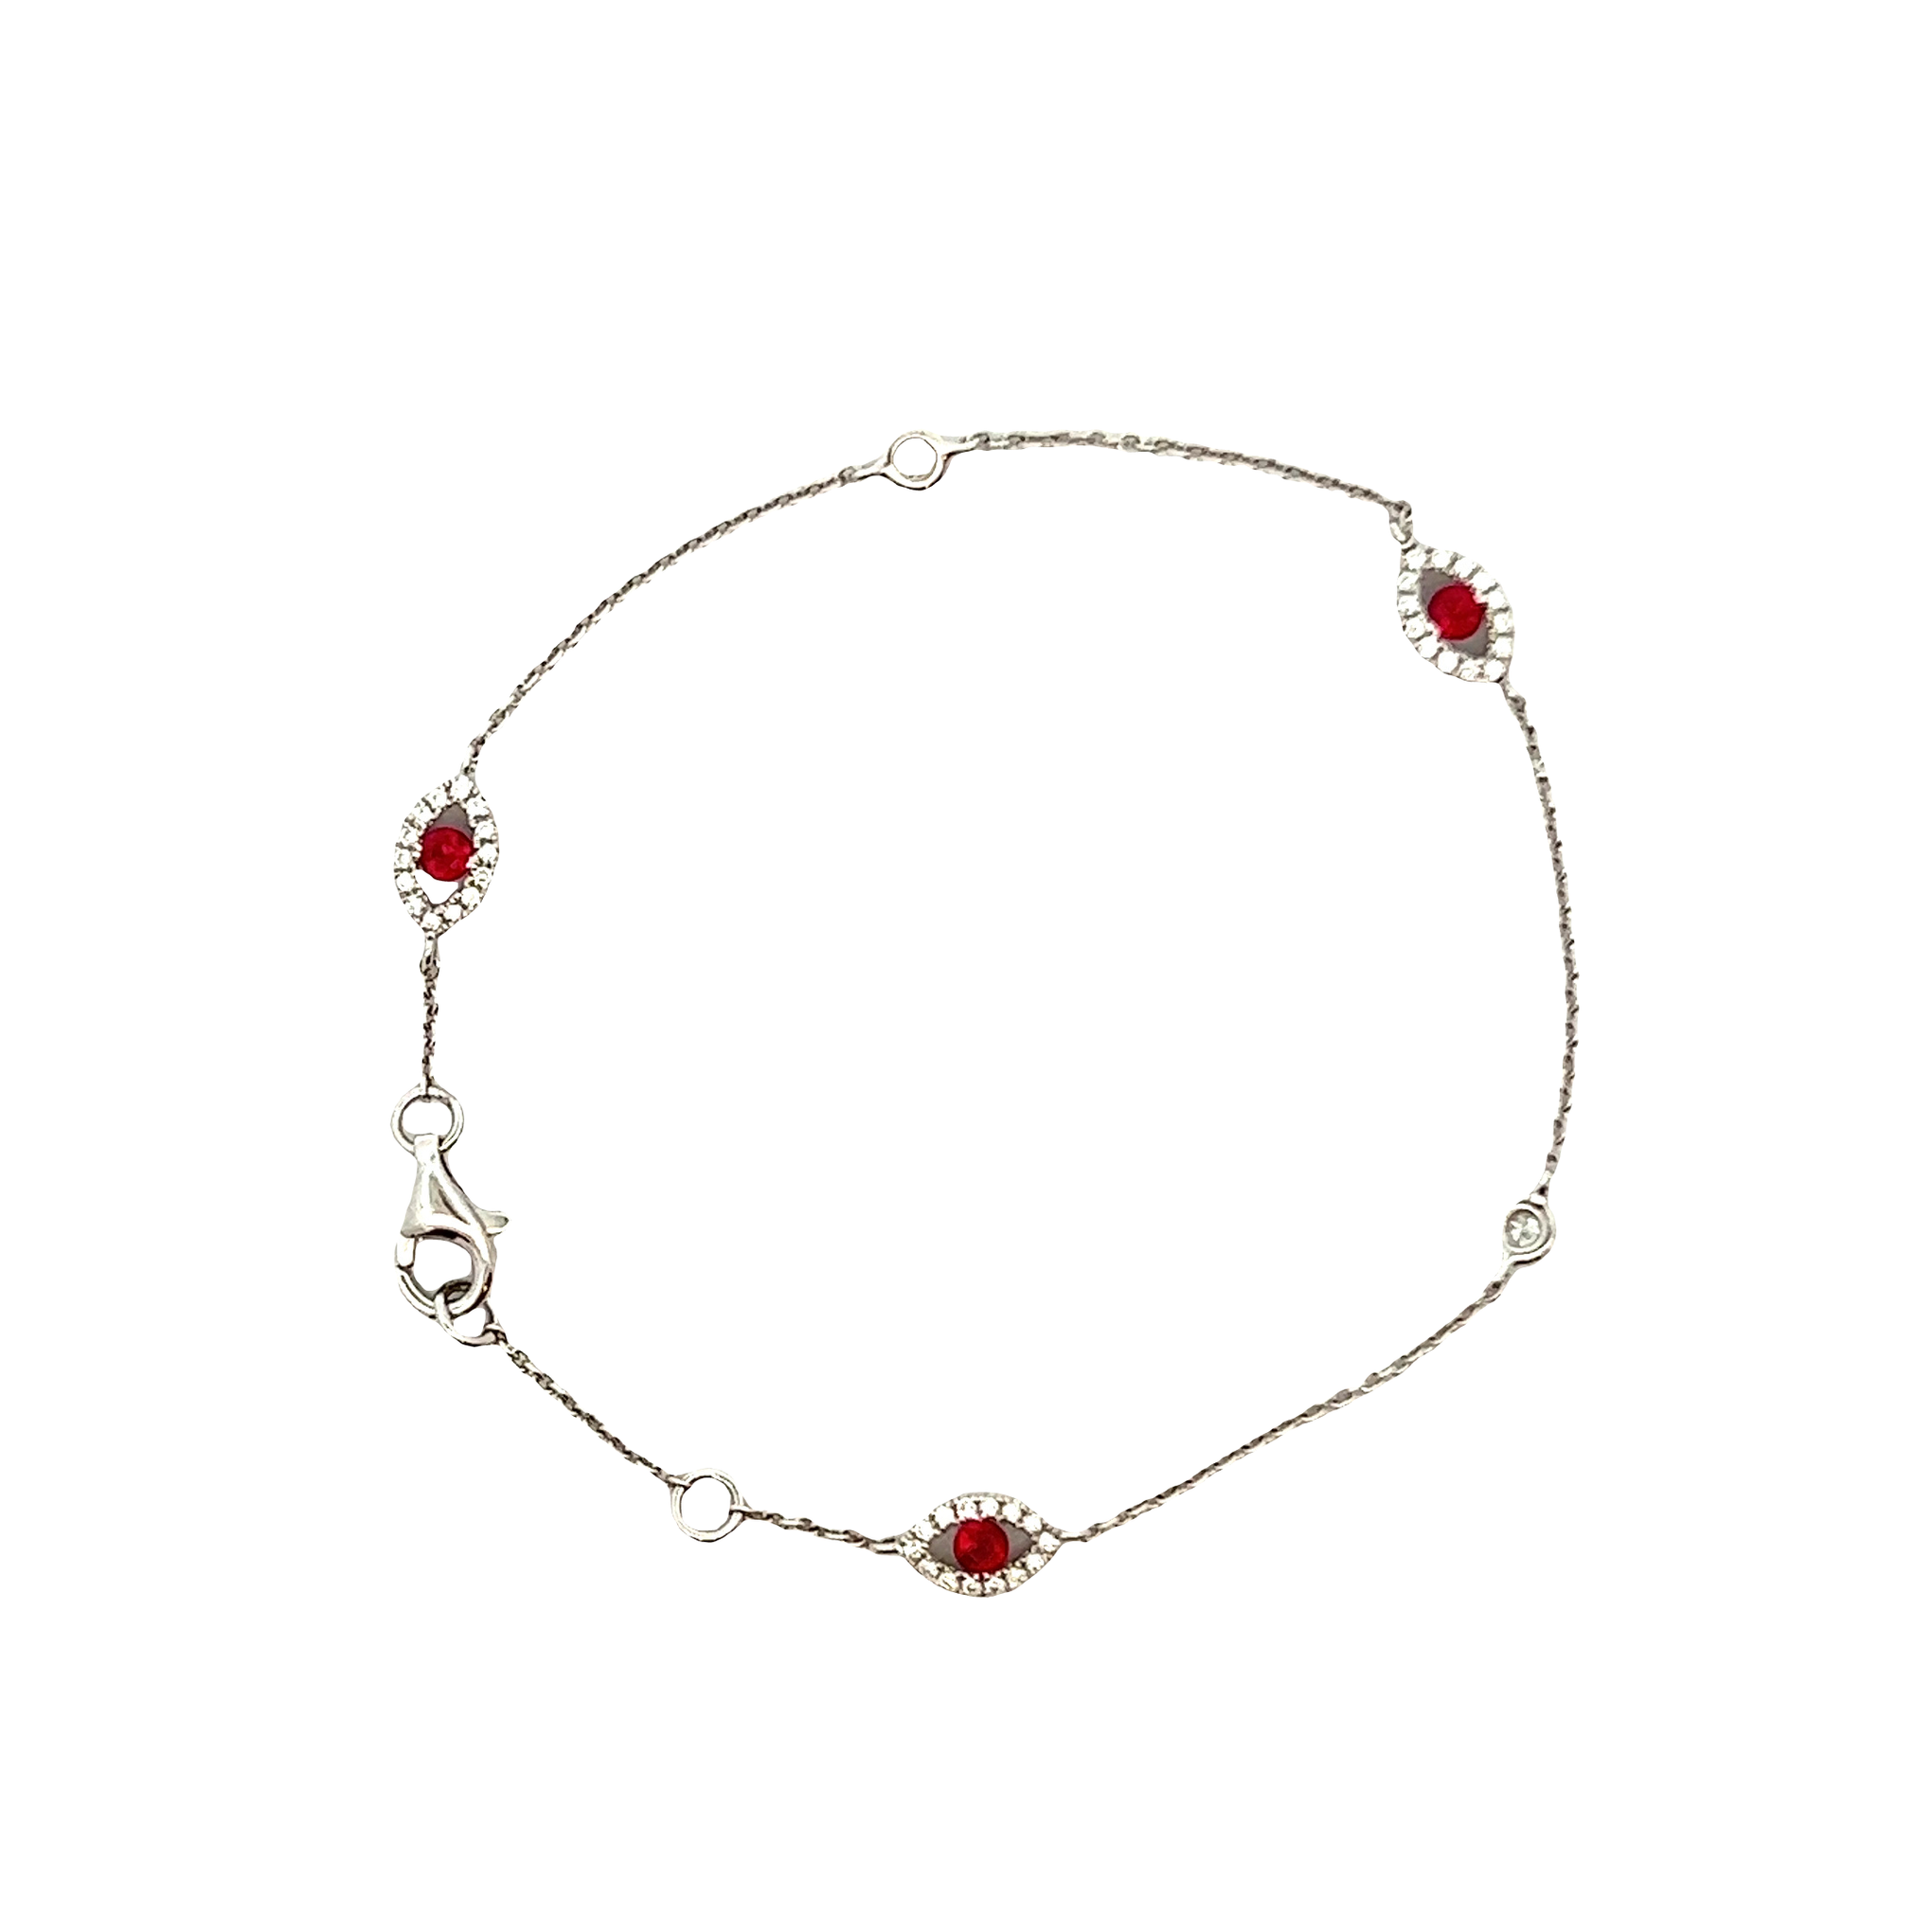 18KT WHITE GOLD, ROUND CUT DIAMOND AND RUBY CHAIN BRACELET.